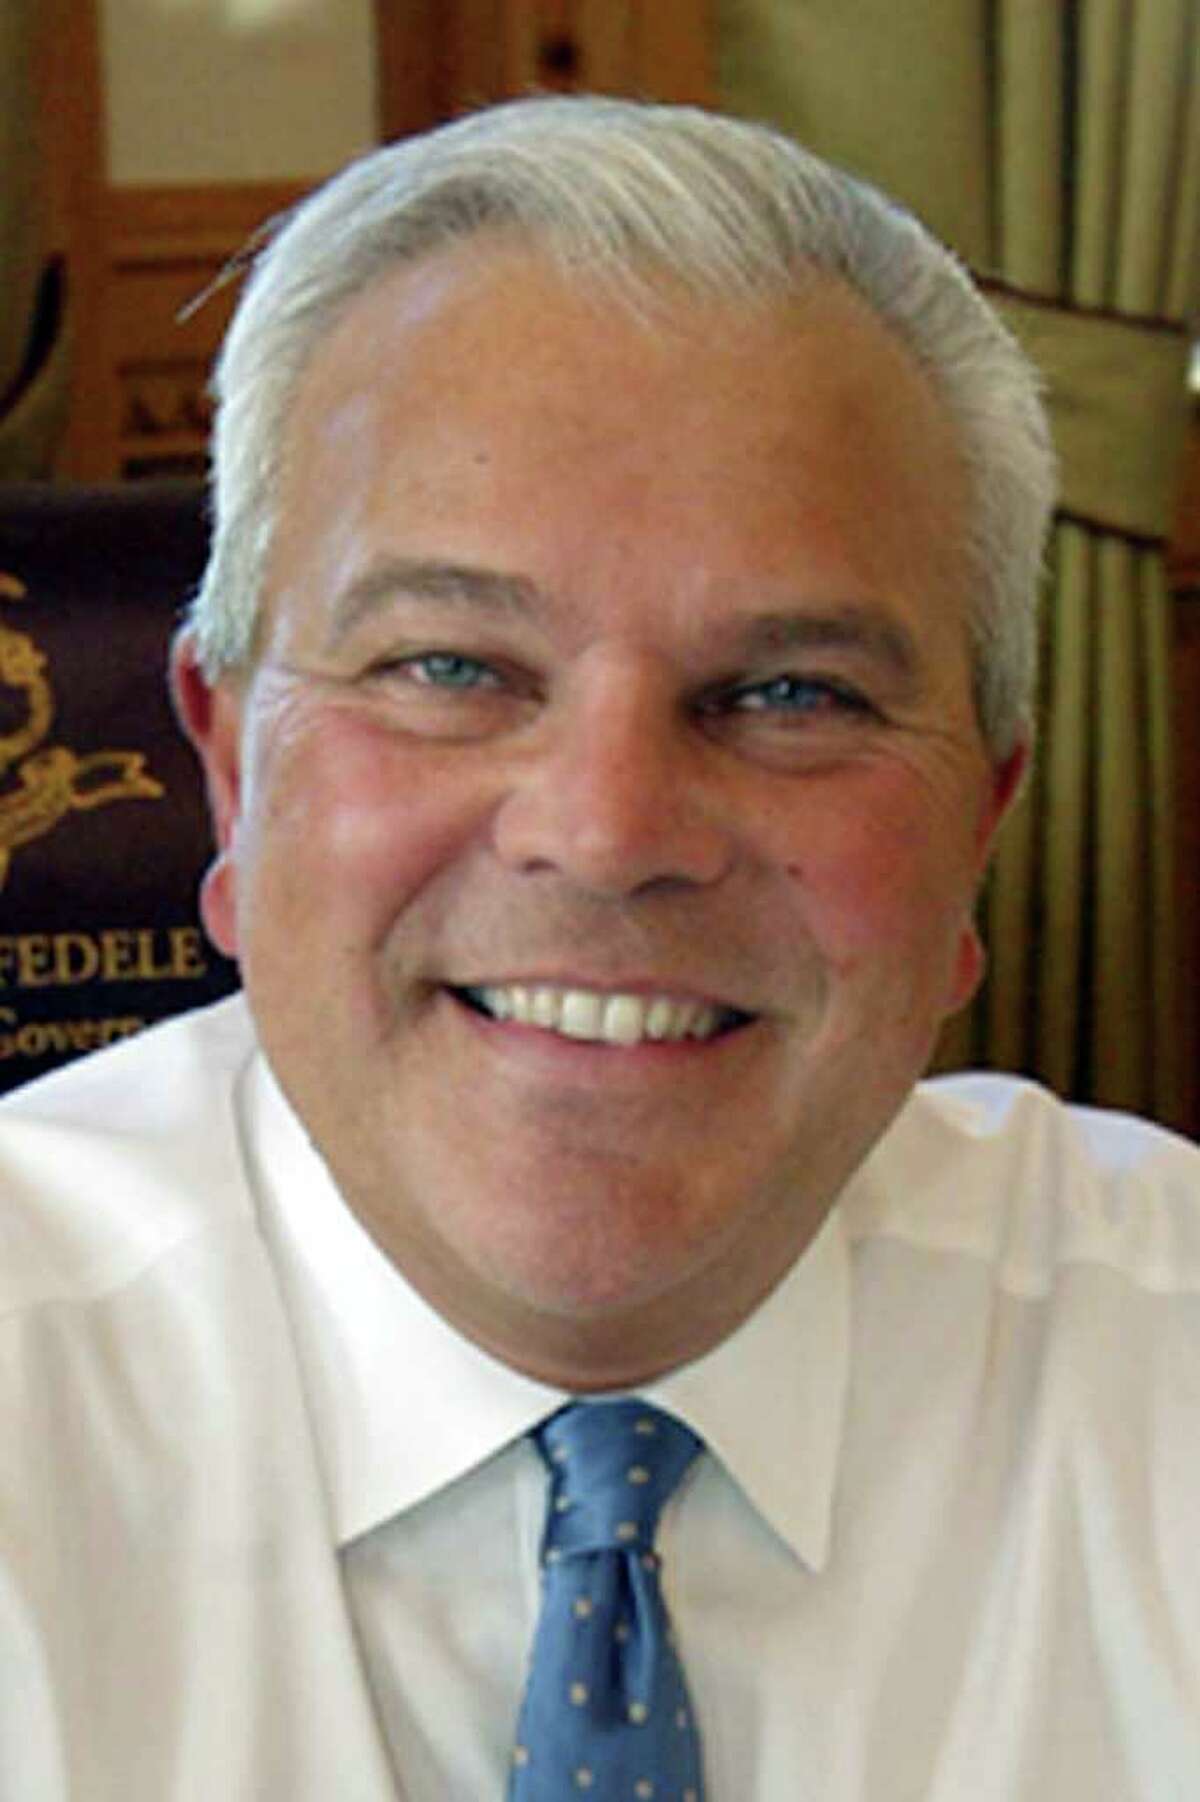 Lt Governor Michael Fedele, in January 2008.